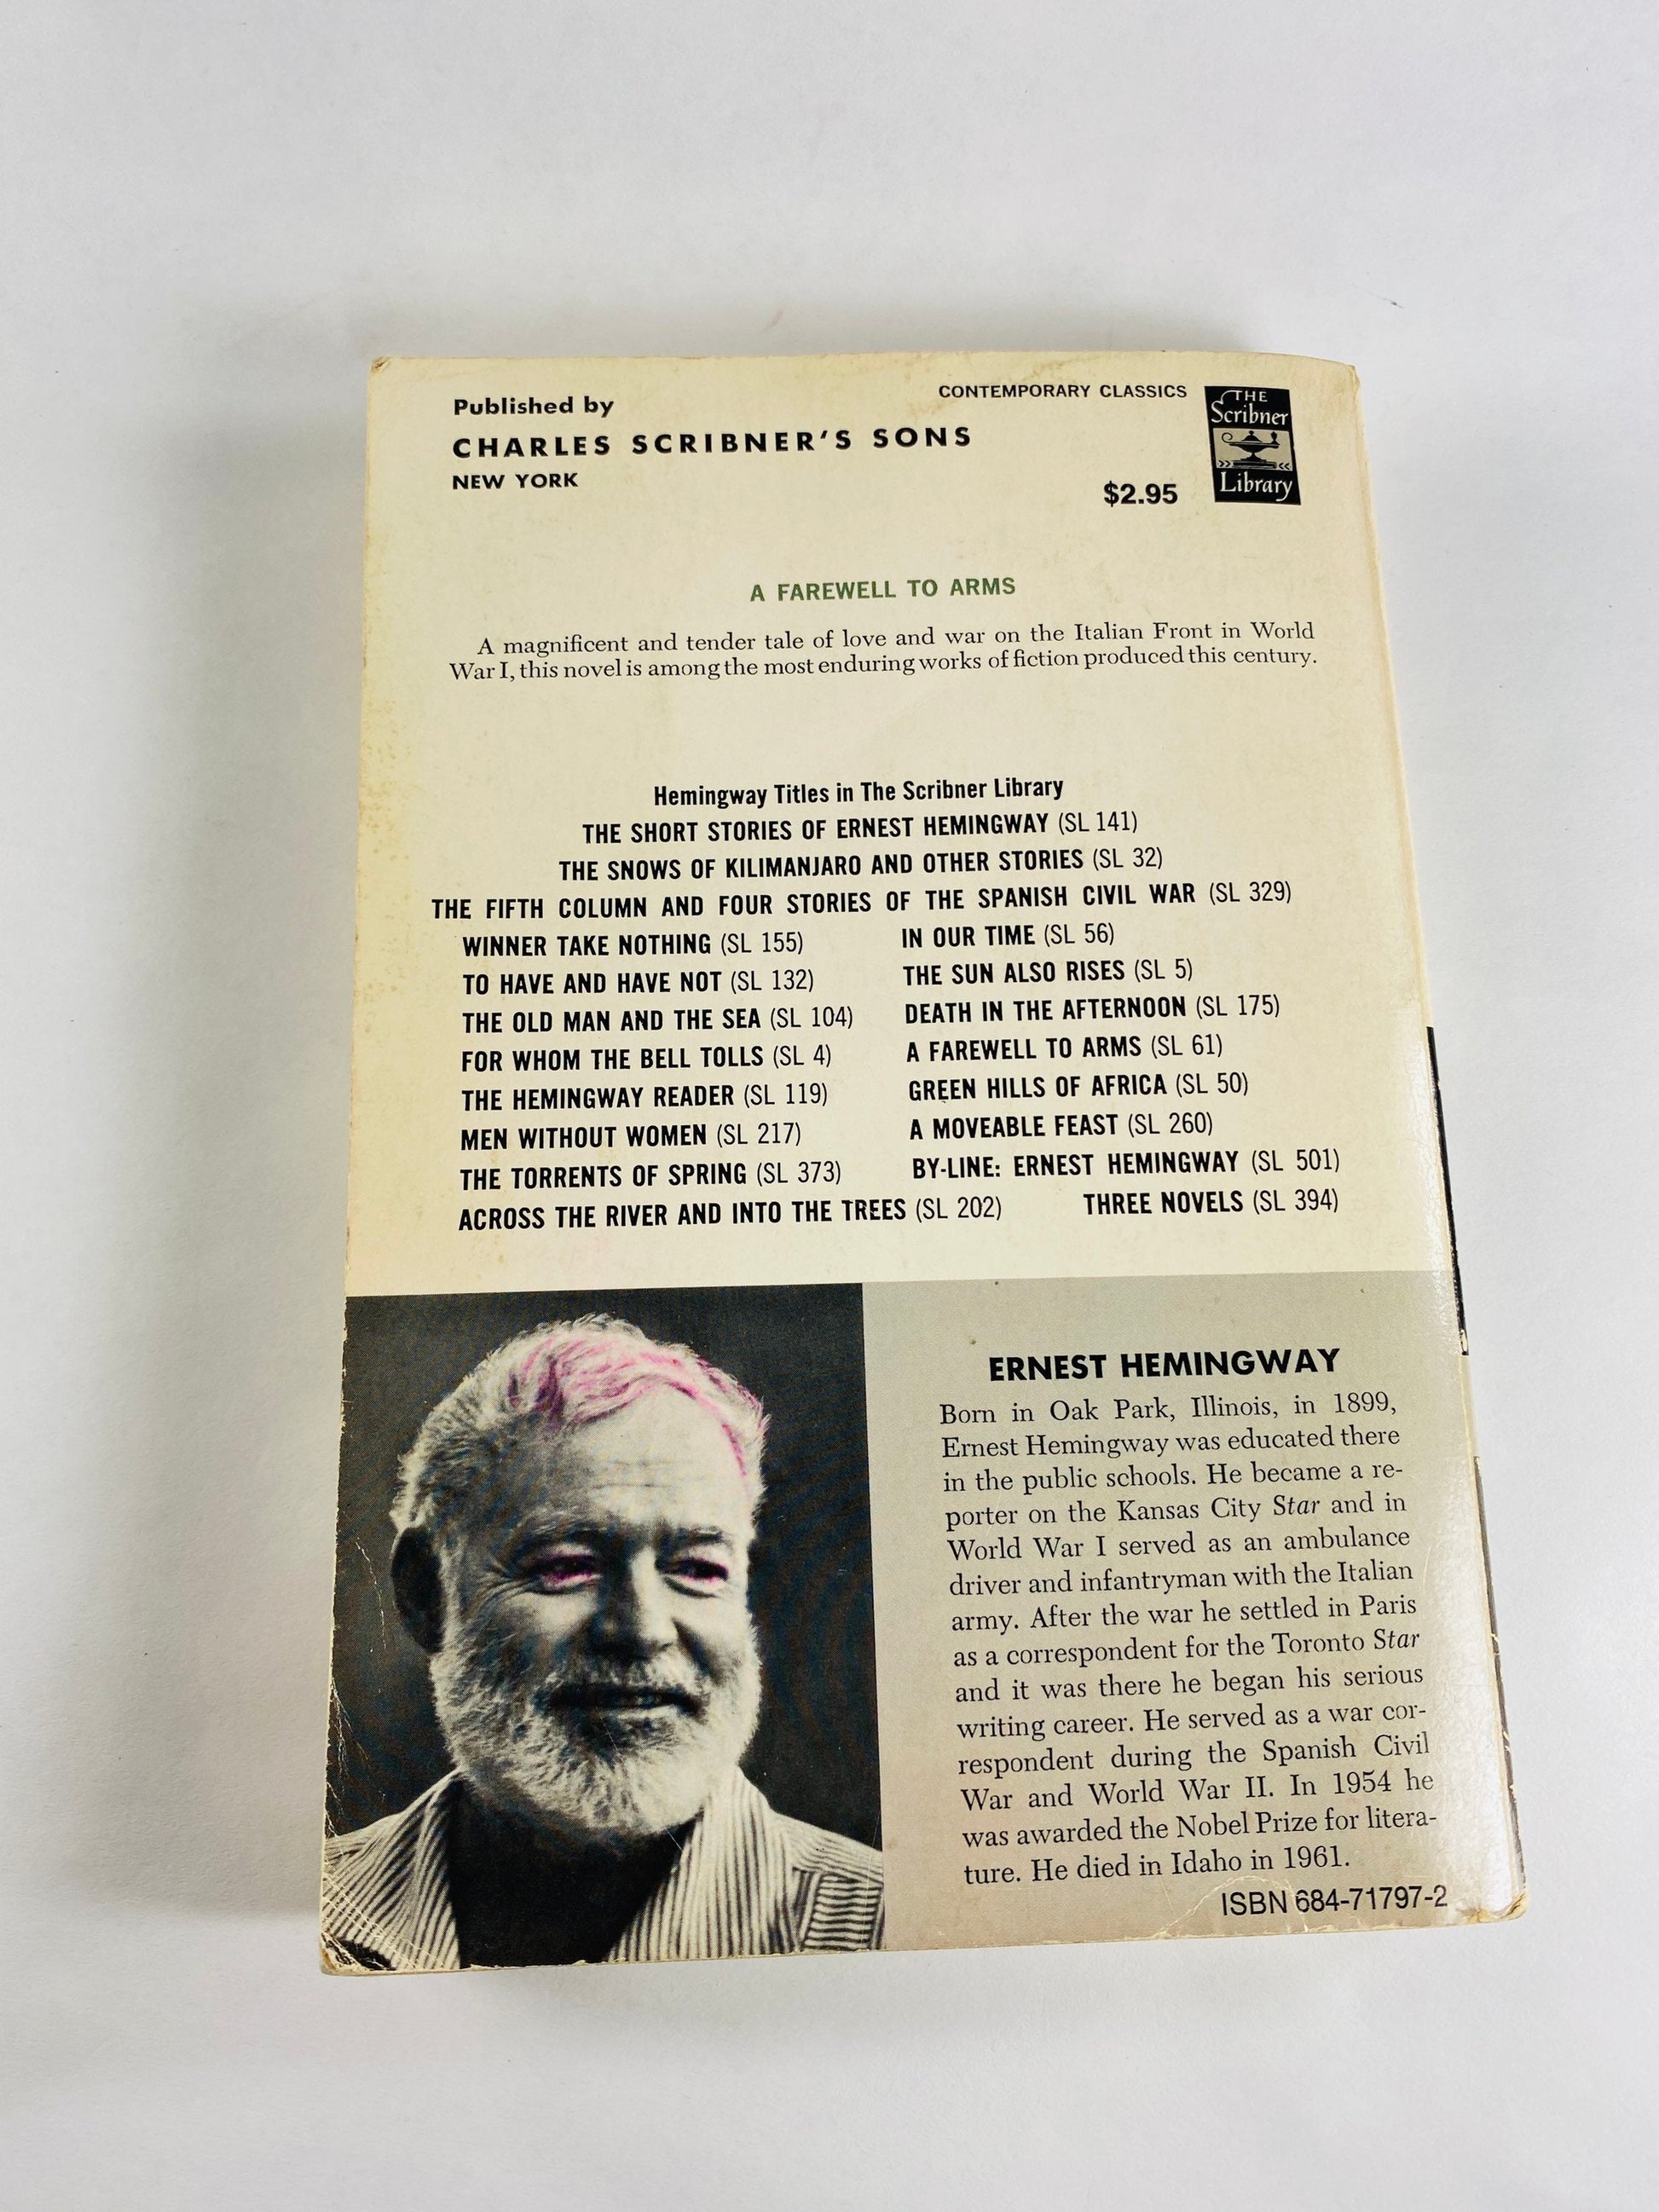 Hemingway Farewell to Arms Vintage Scribner's Library paperback book circa 1969 Grey home office decor. Collectible gift